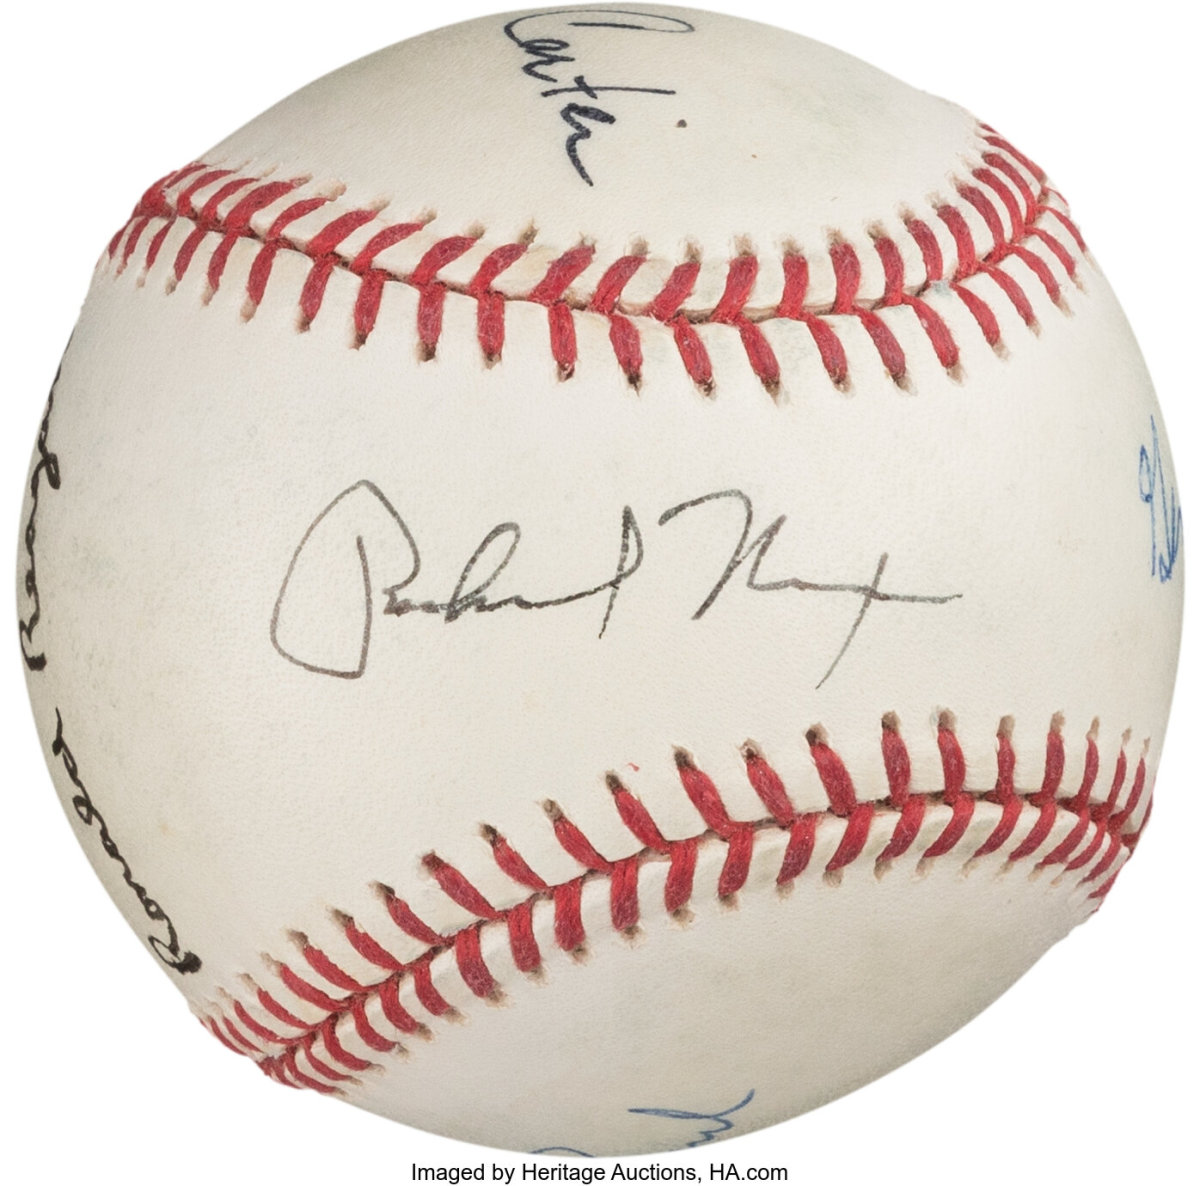 A baseball signed by former Presidents Nixon, Ford, Reagan, Bush, Clinton and Carter as part of the Joe Garagiola Collection.